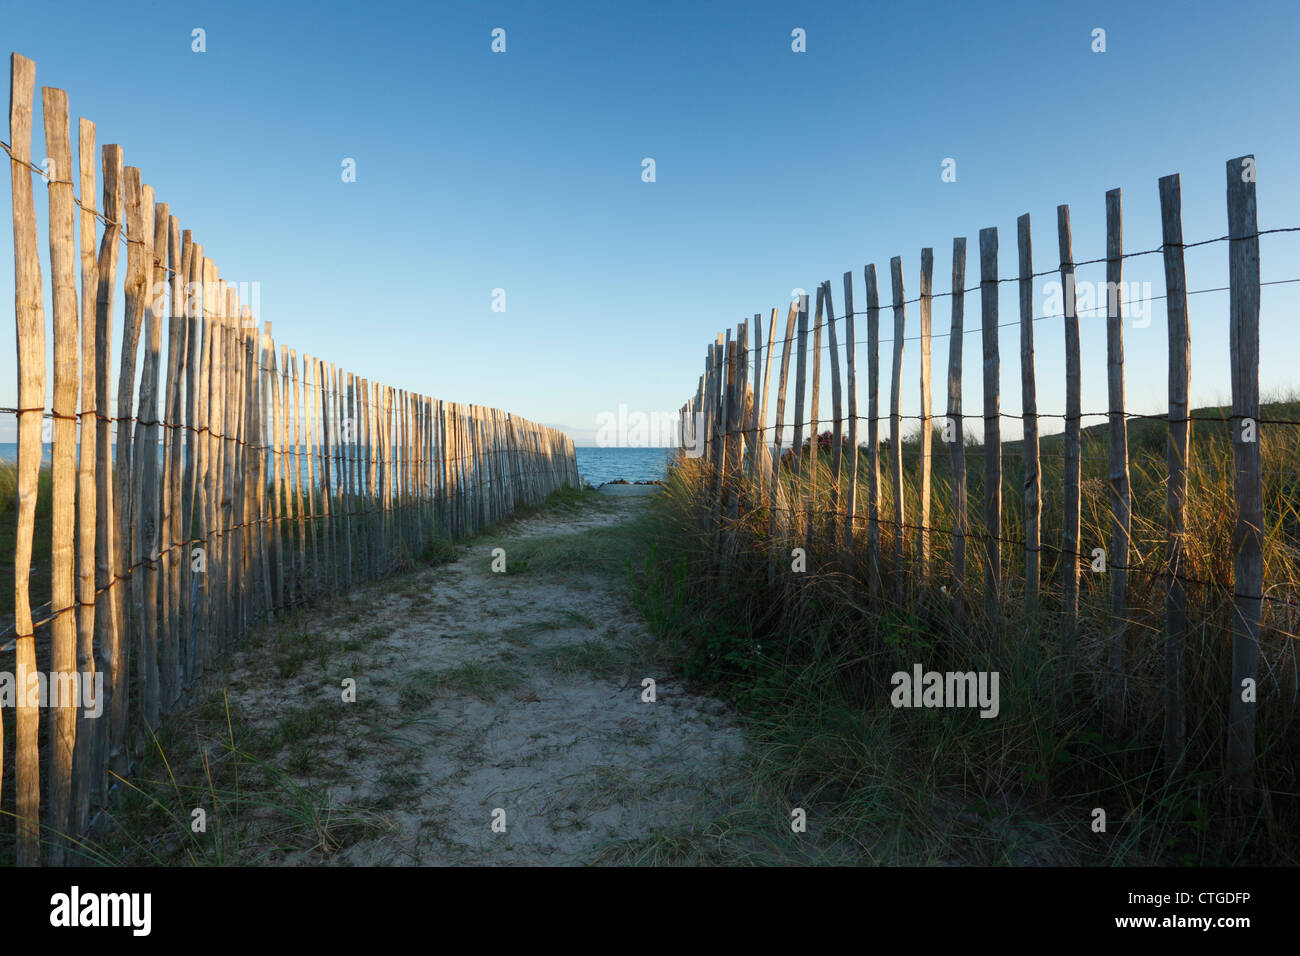 Fenced path through dunes at Kervillen Beach near Carnac. Brittany. France. Stock Photo